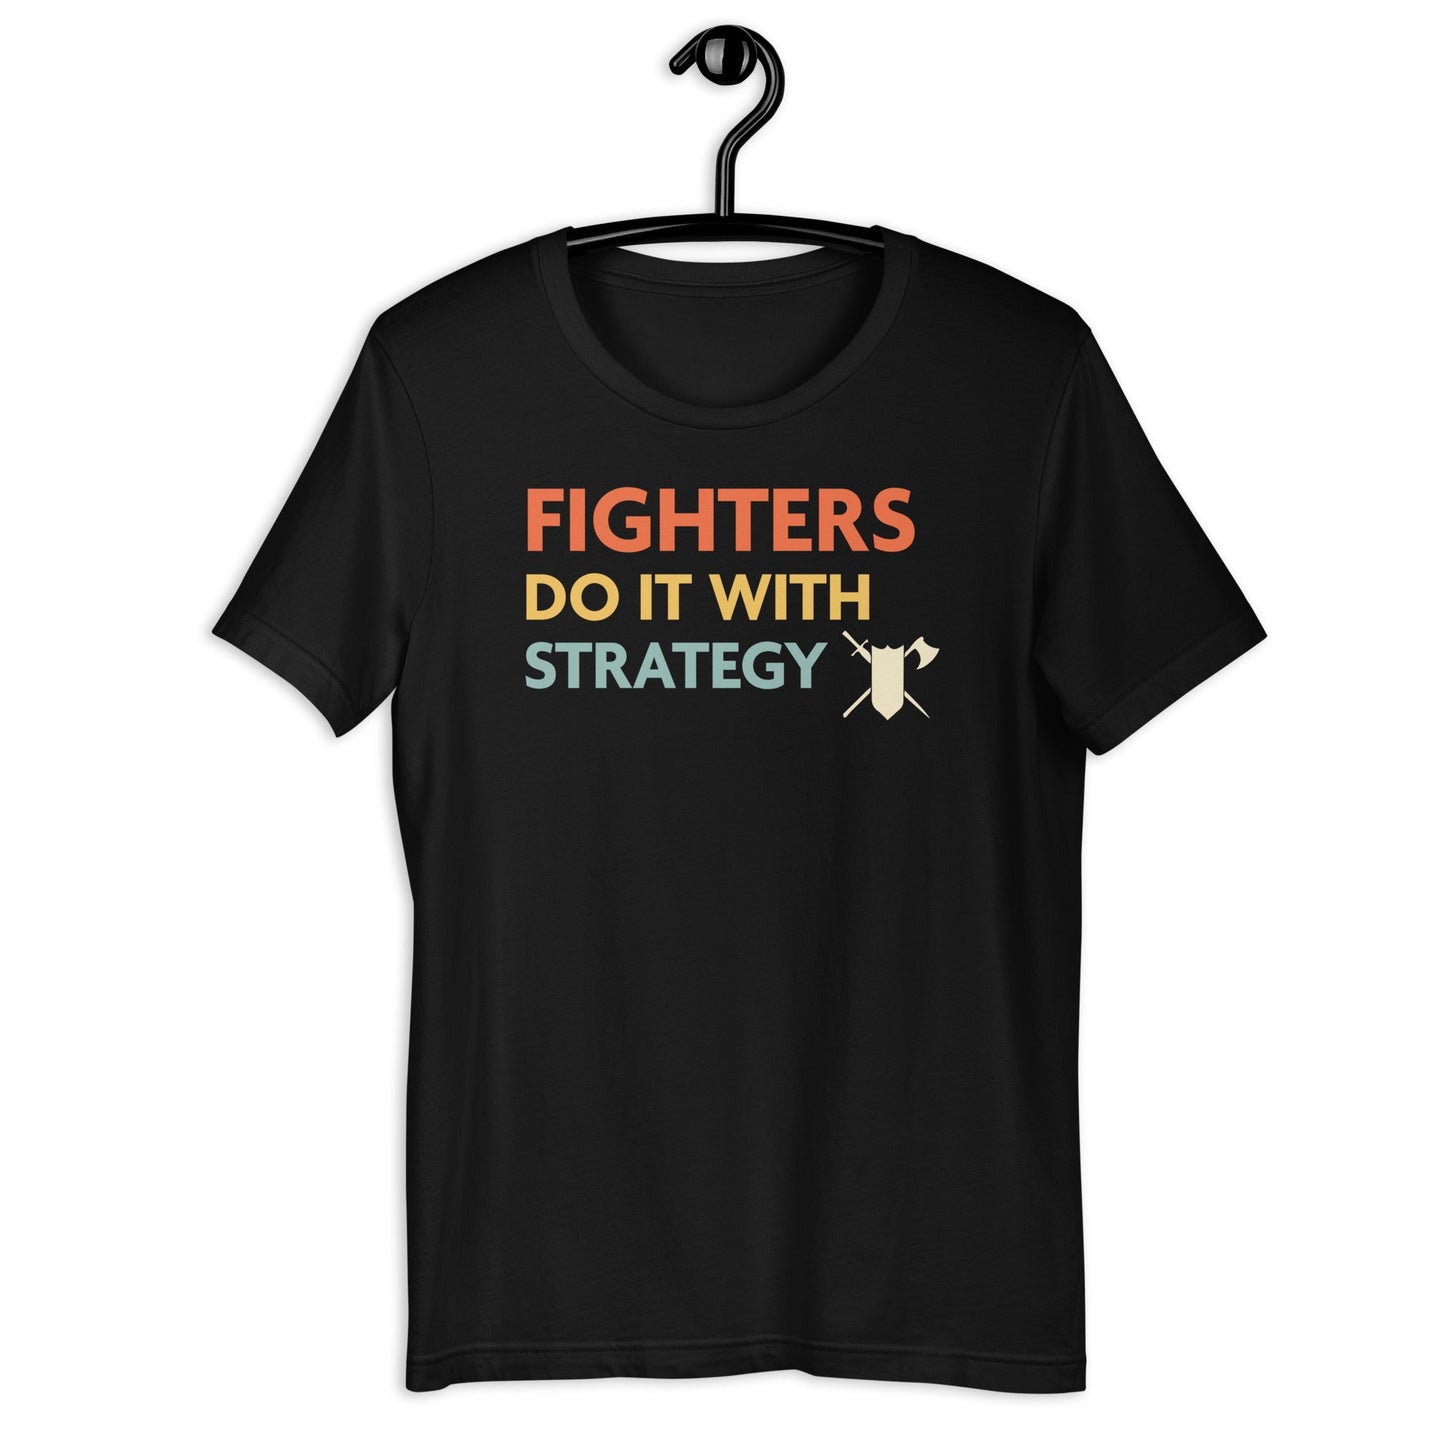 DnD Fighters Do It With Strategy Shirt T-Shirt Black / S